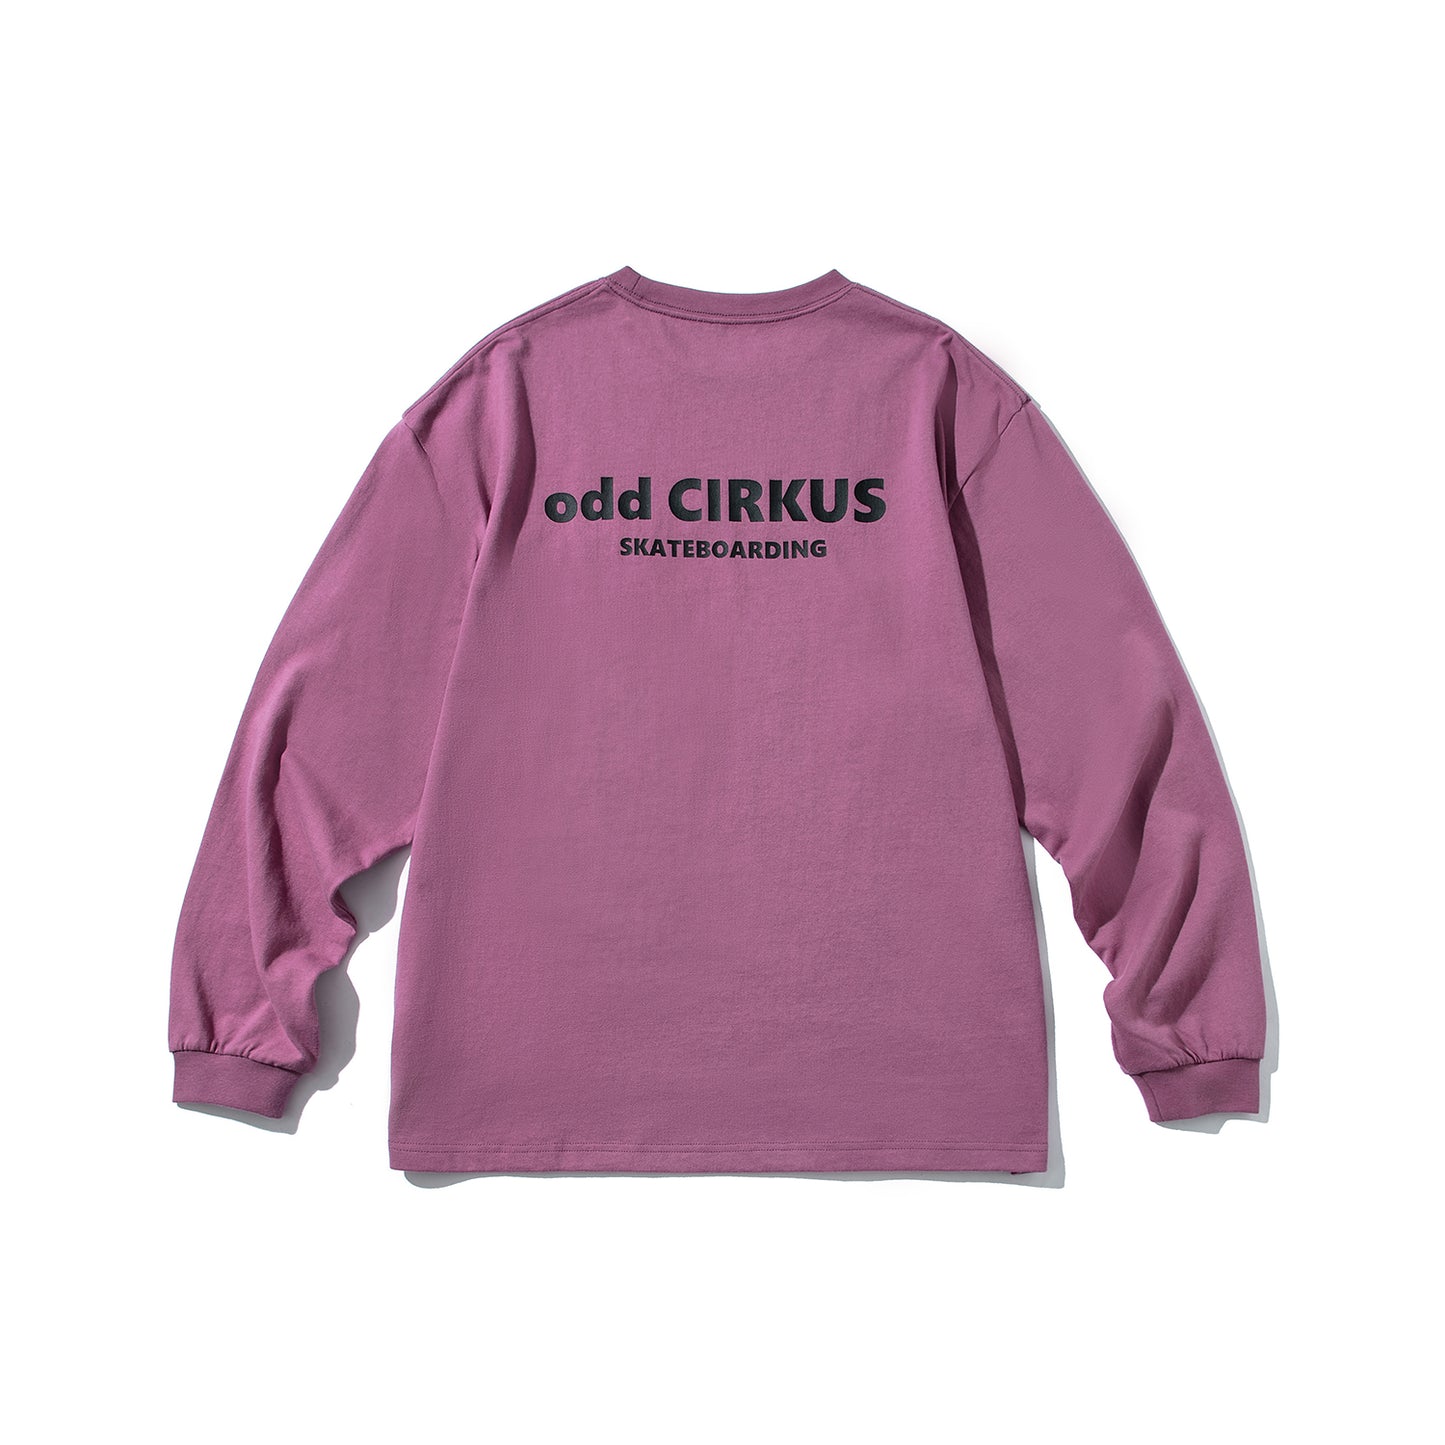 Long-sleeved letter-printed round neck T-shirt with chest pocket in Dark pink